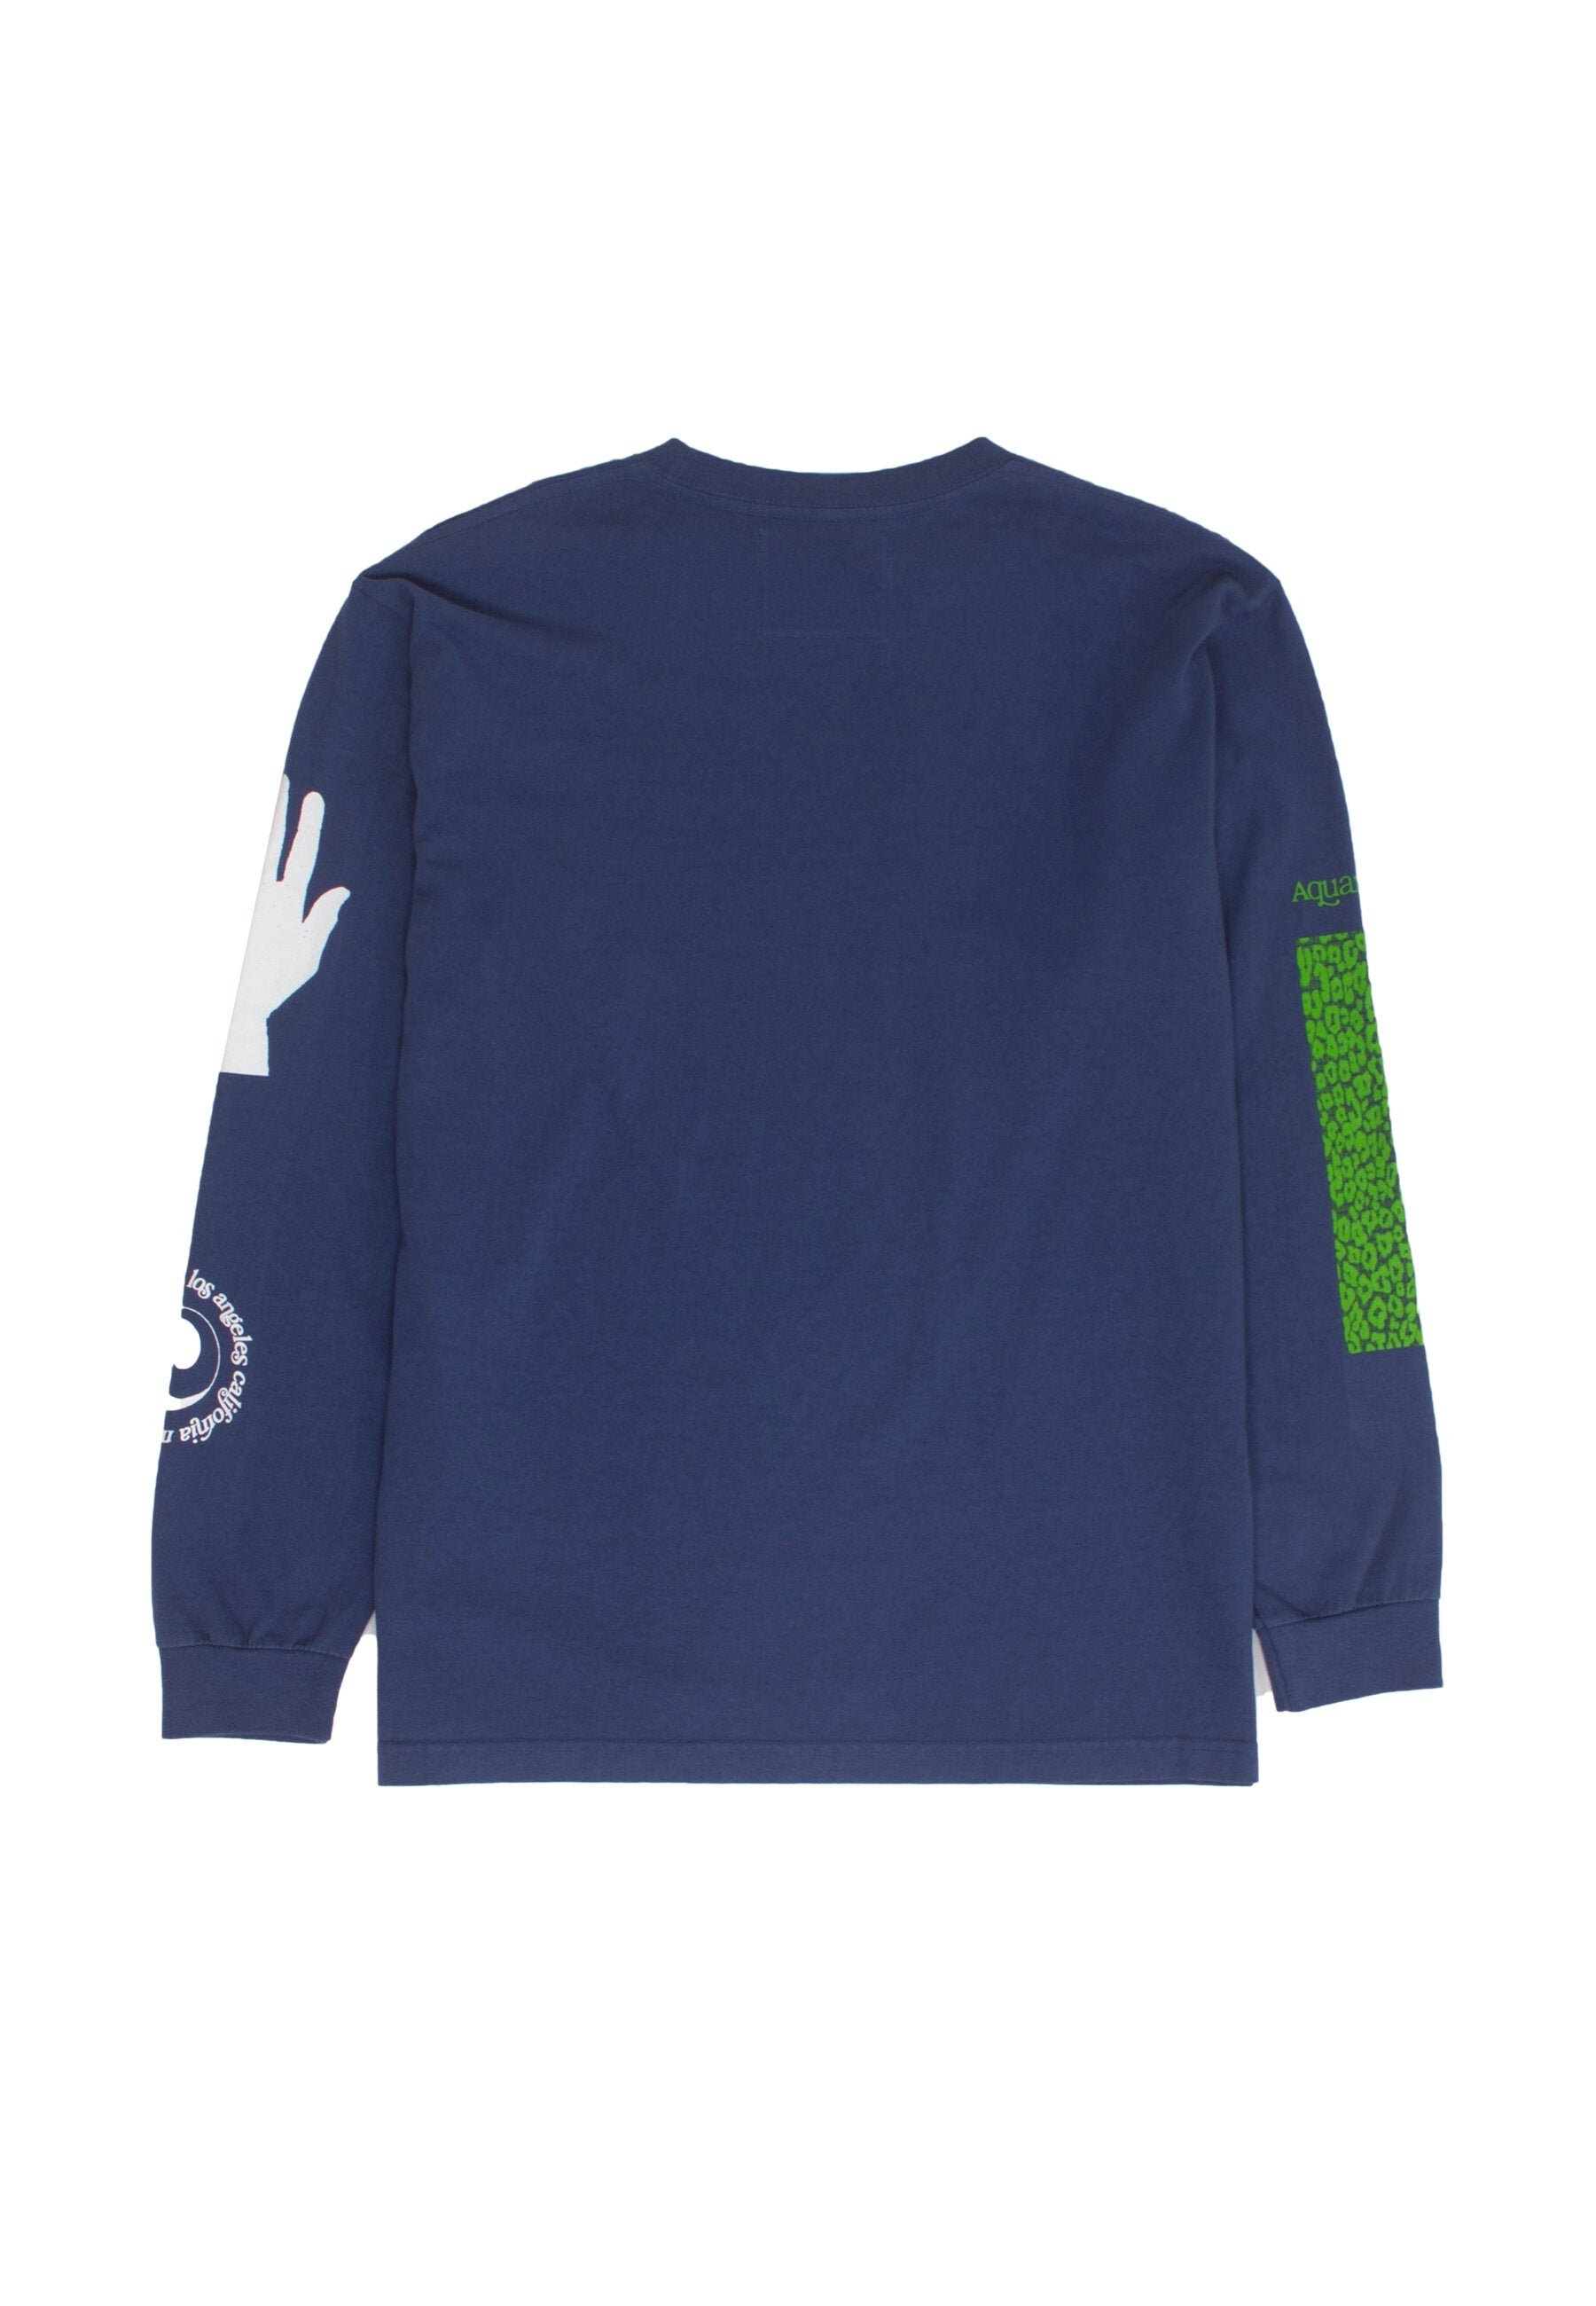 Aquarian Collage L/S Tee - Washed Navy-Mister Green-Mister Green